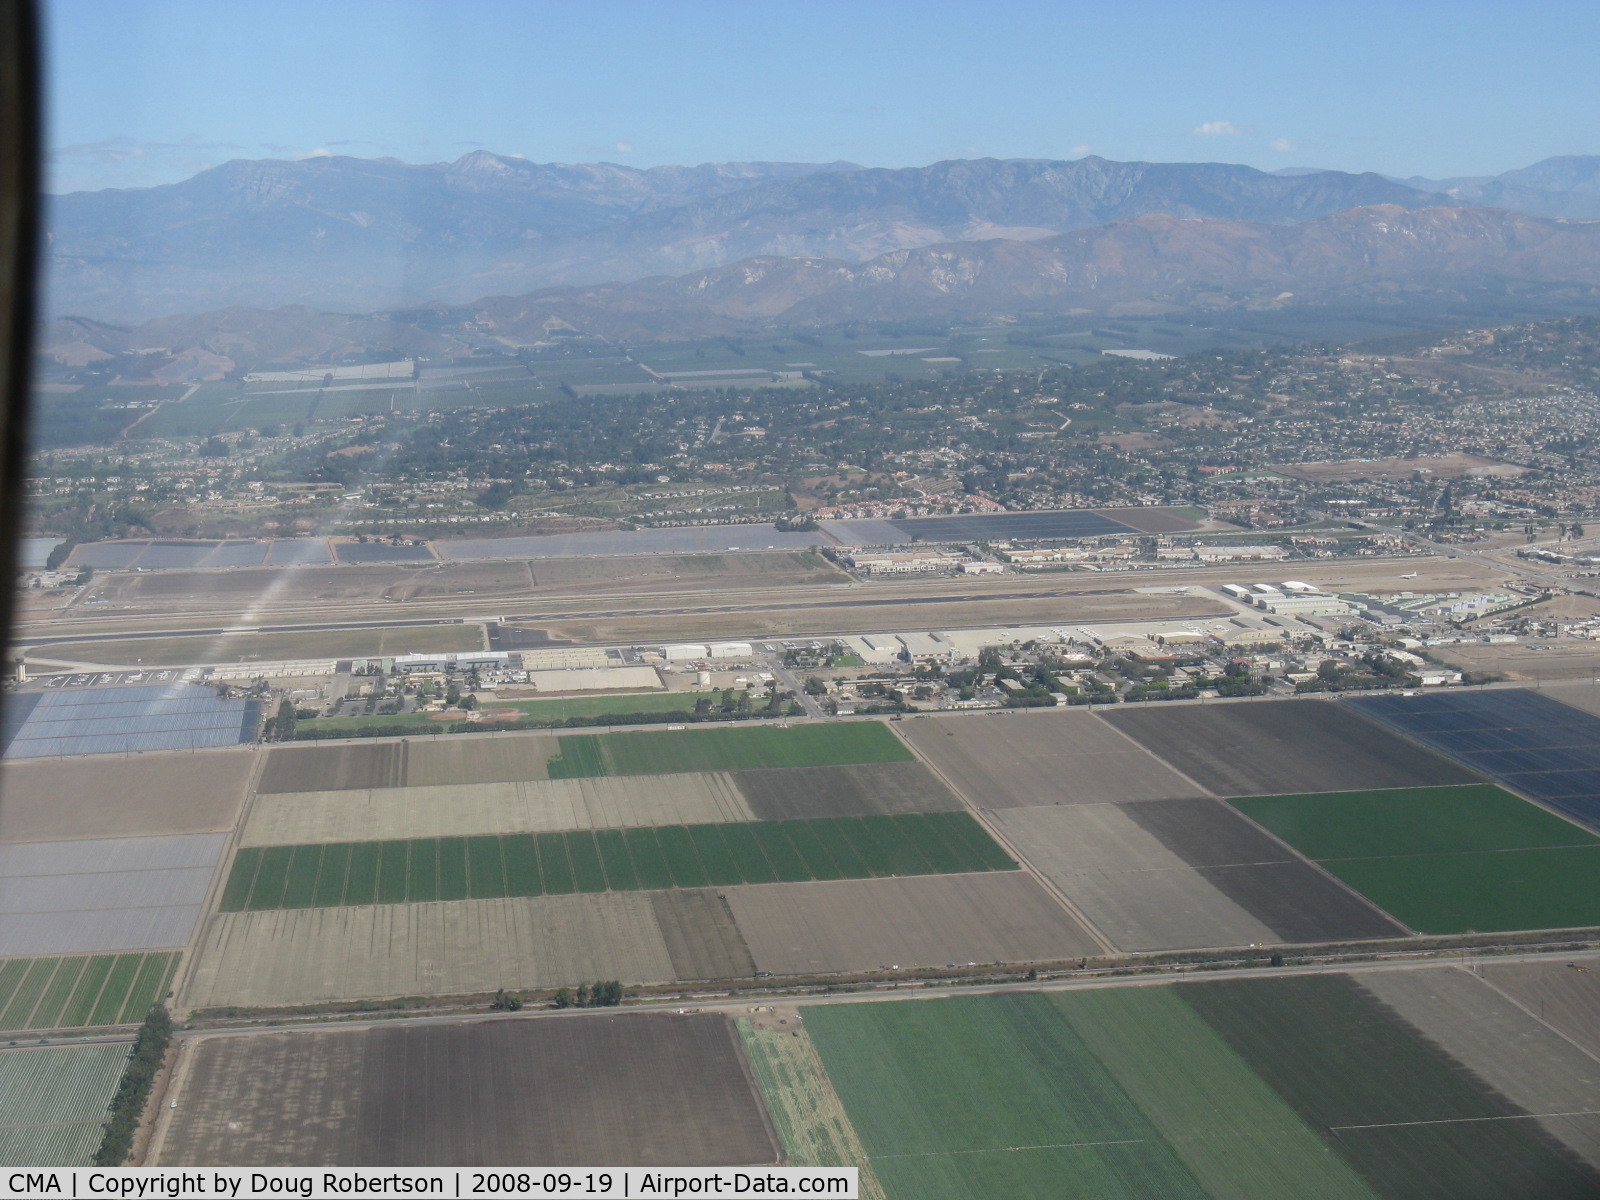 Camarillo Airport (CMA) - Was Oxnard Air Force Base until 1971-General Aviation Airport since 1976. Taken from south of airport from Beech 36 BONANZA.